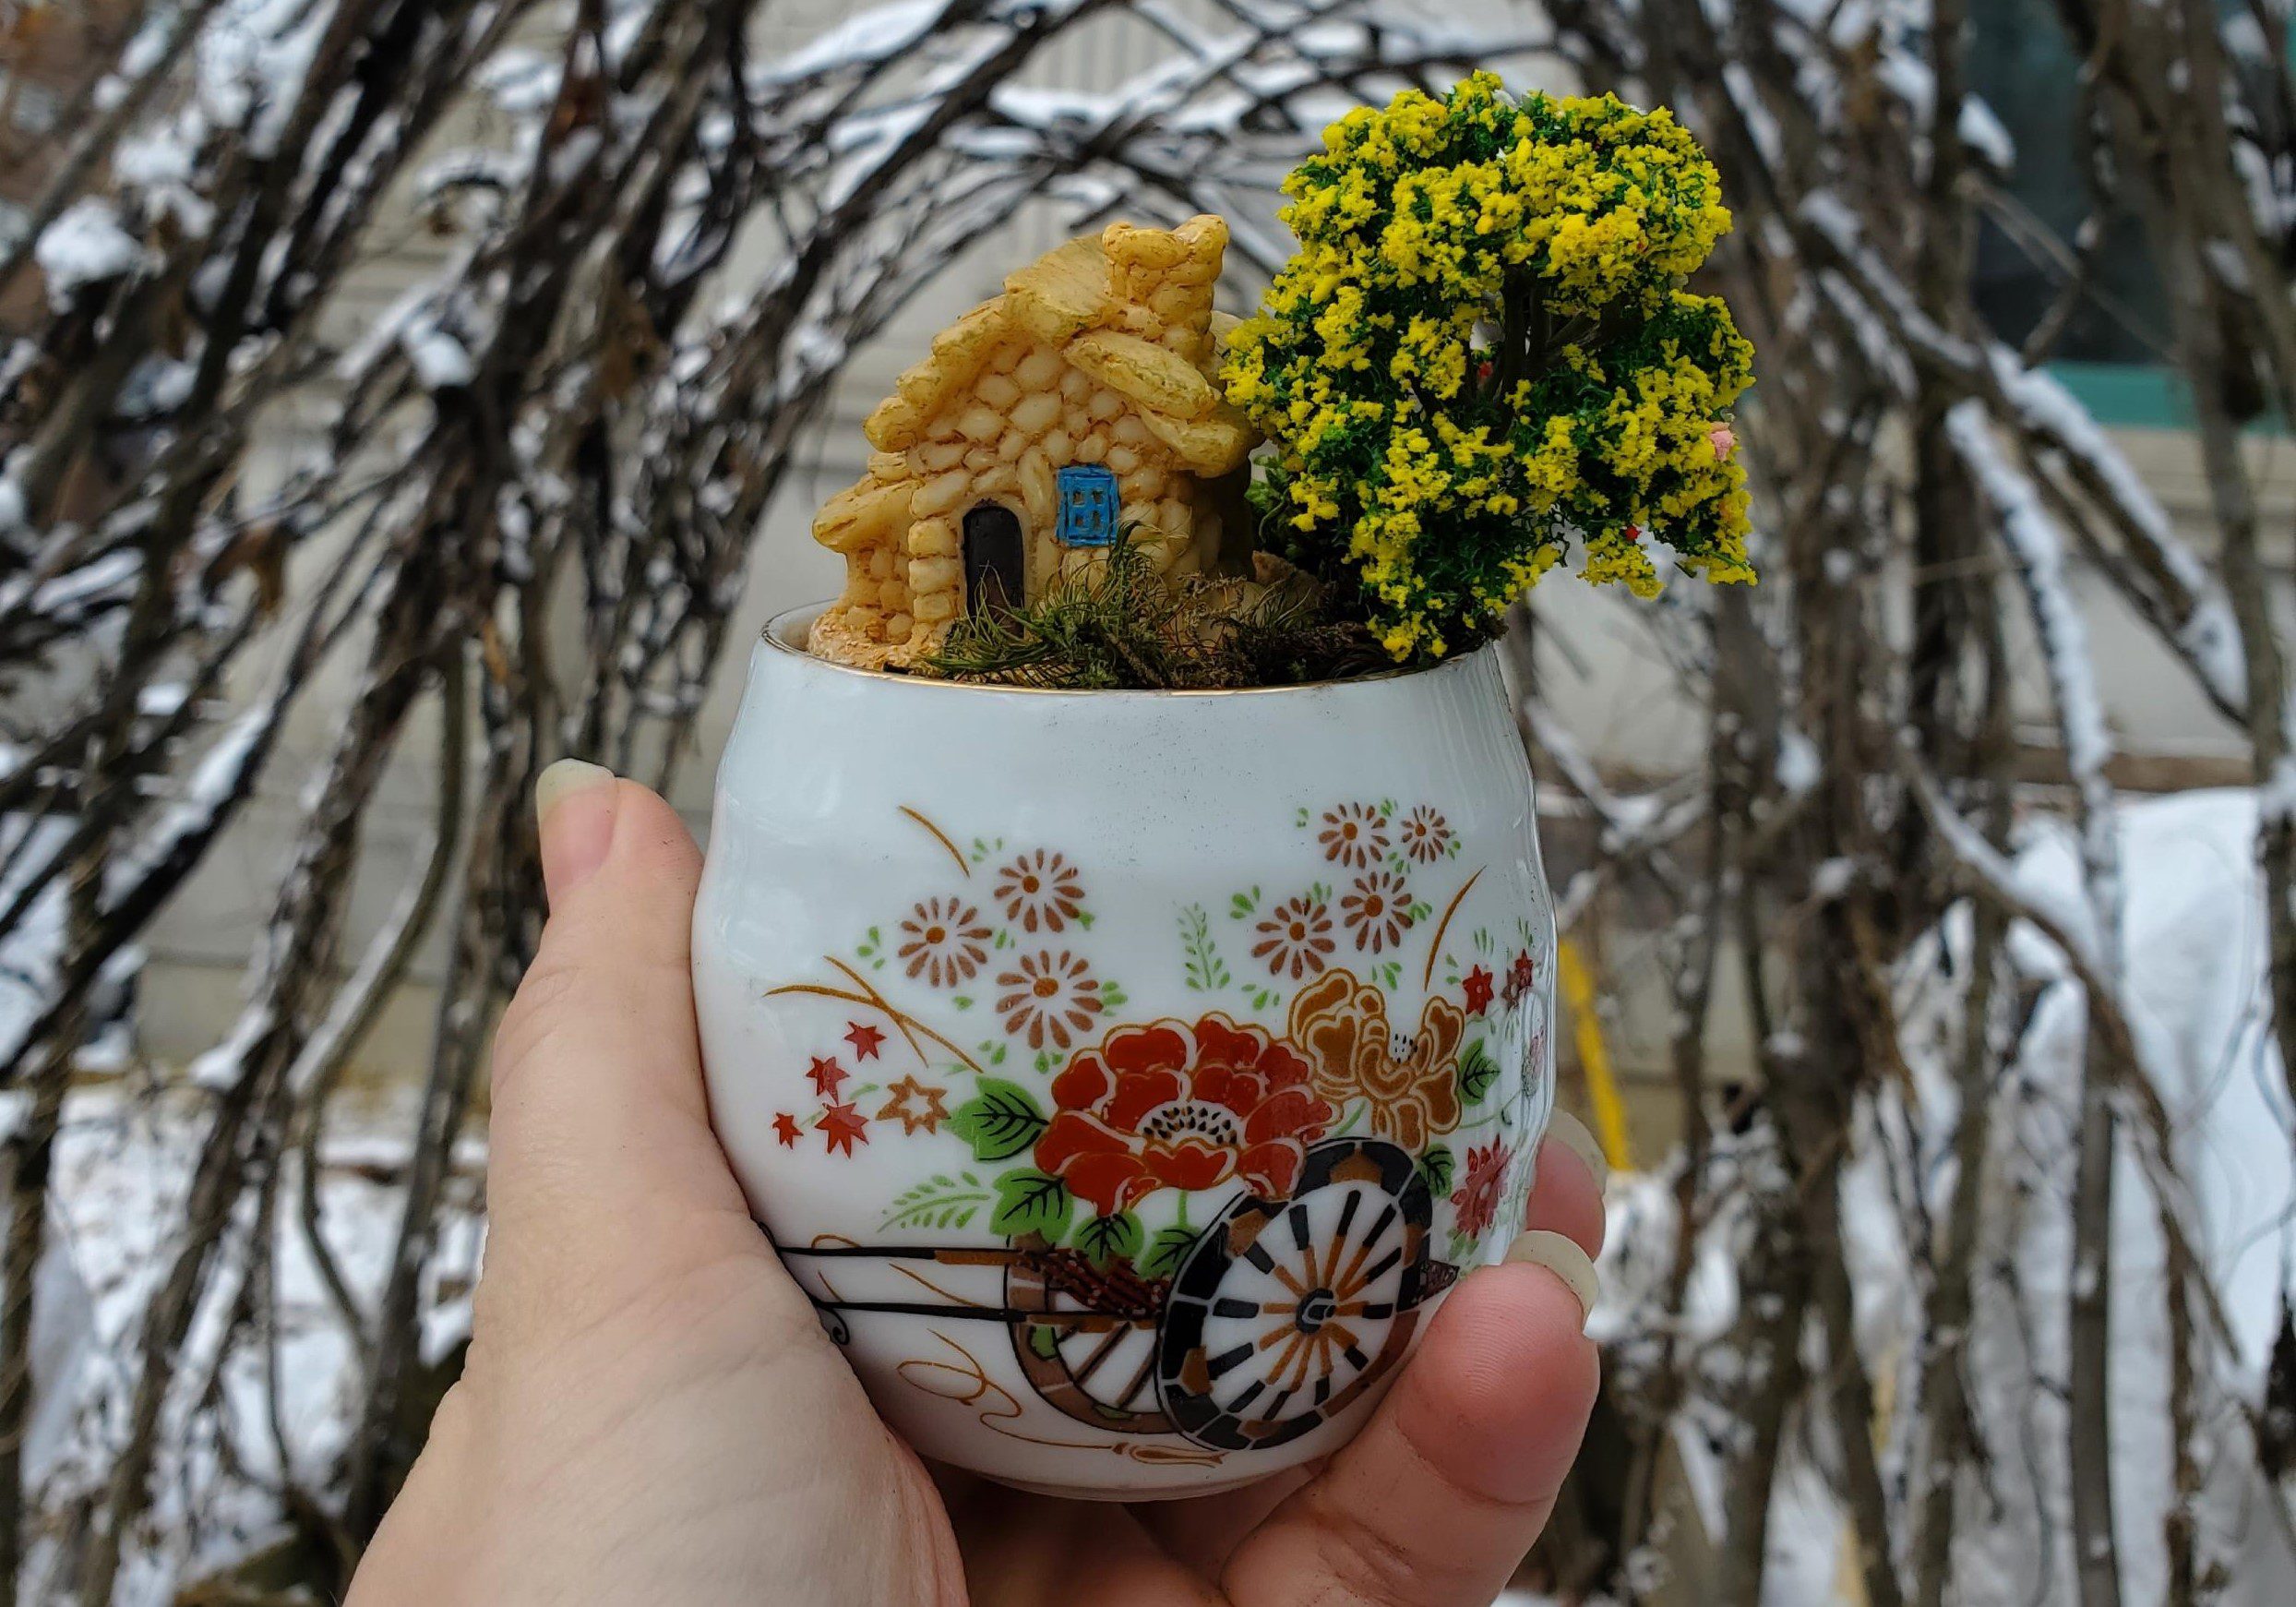 A hand holds up a small, porcelain teacup with a plant and a small, decorative house inside.